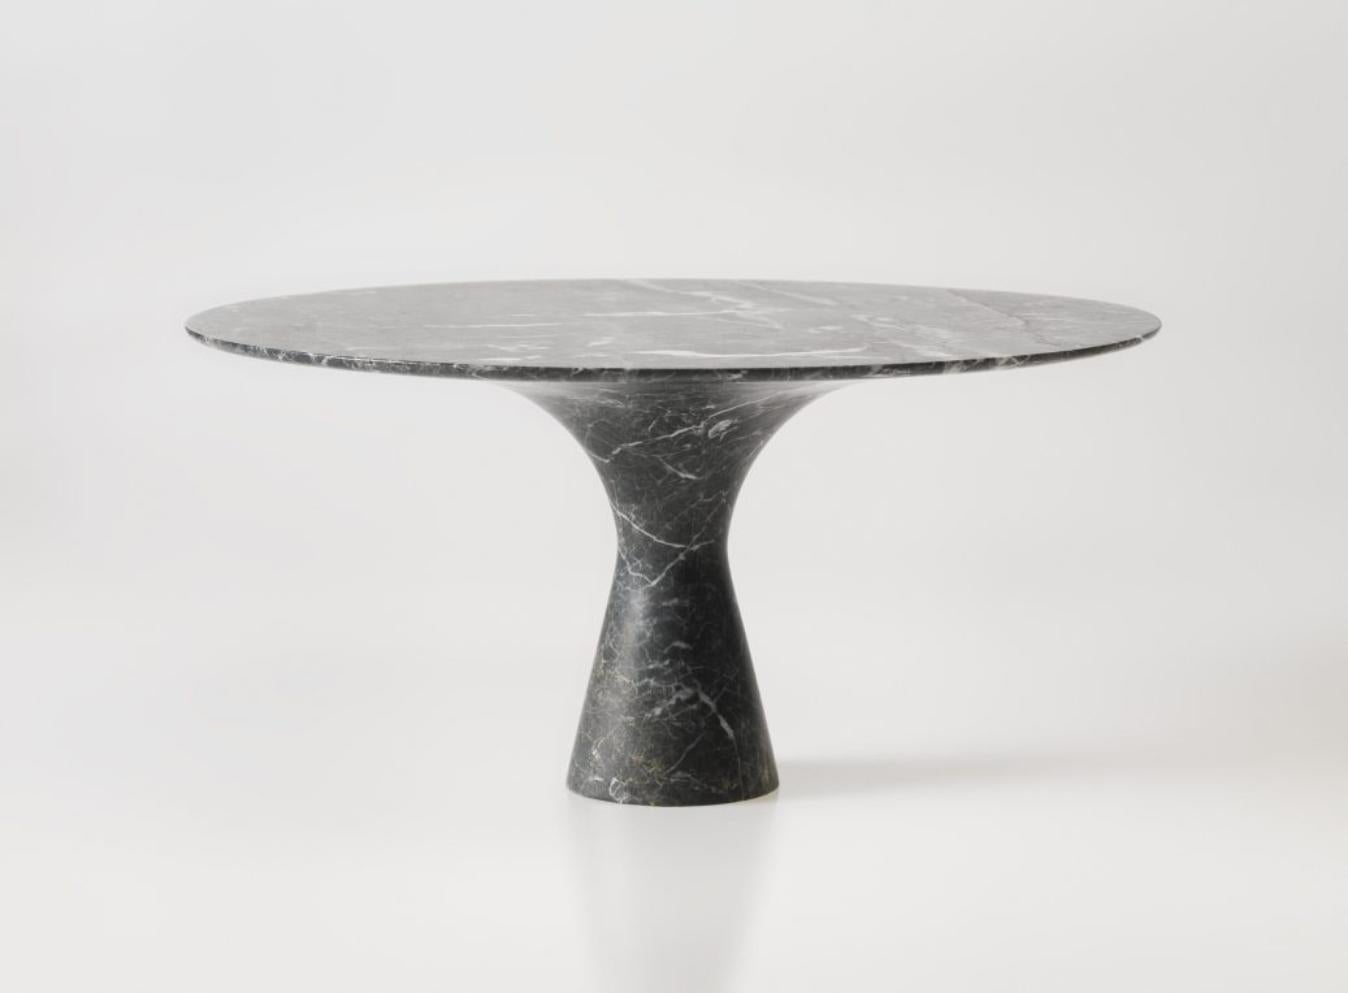 Grey Saint Laurent refined contemporary marble oval low table 130/27
Dimensions: 130 x 27 cm
Materials: Grey Saint Laurent

Angelo is the essence of a round table in natural stone, a sculptural shape in robust material with elegant lines and